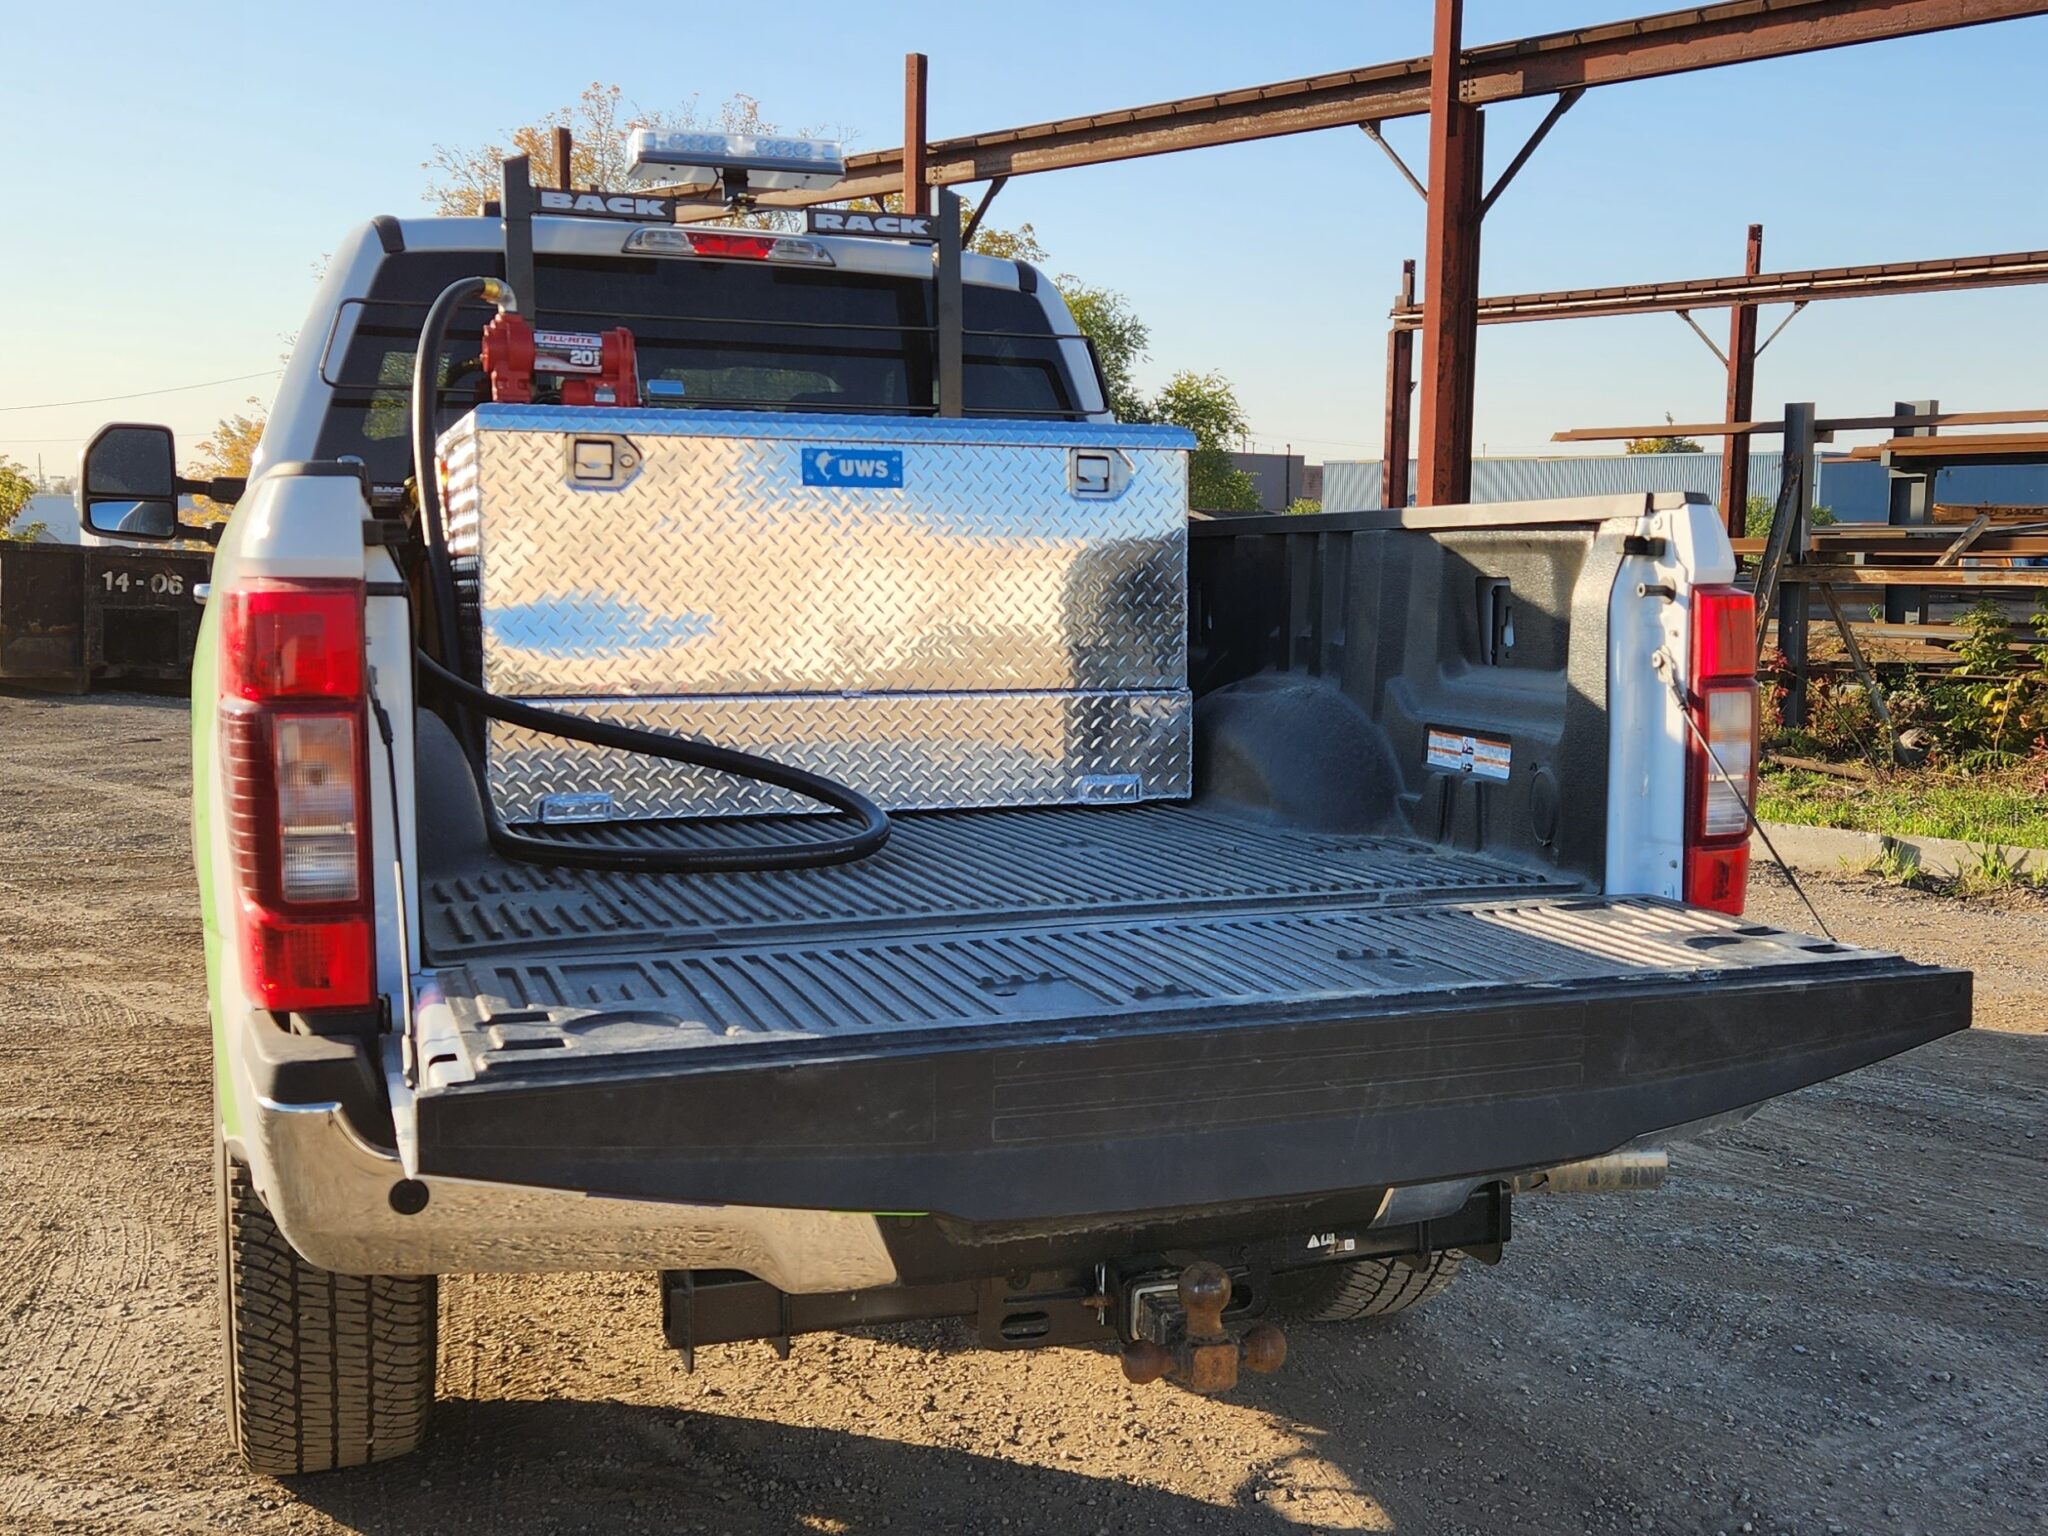 Ford F-250 with Fuel Transfer Tank